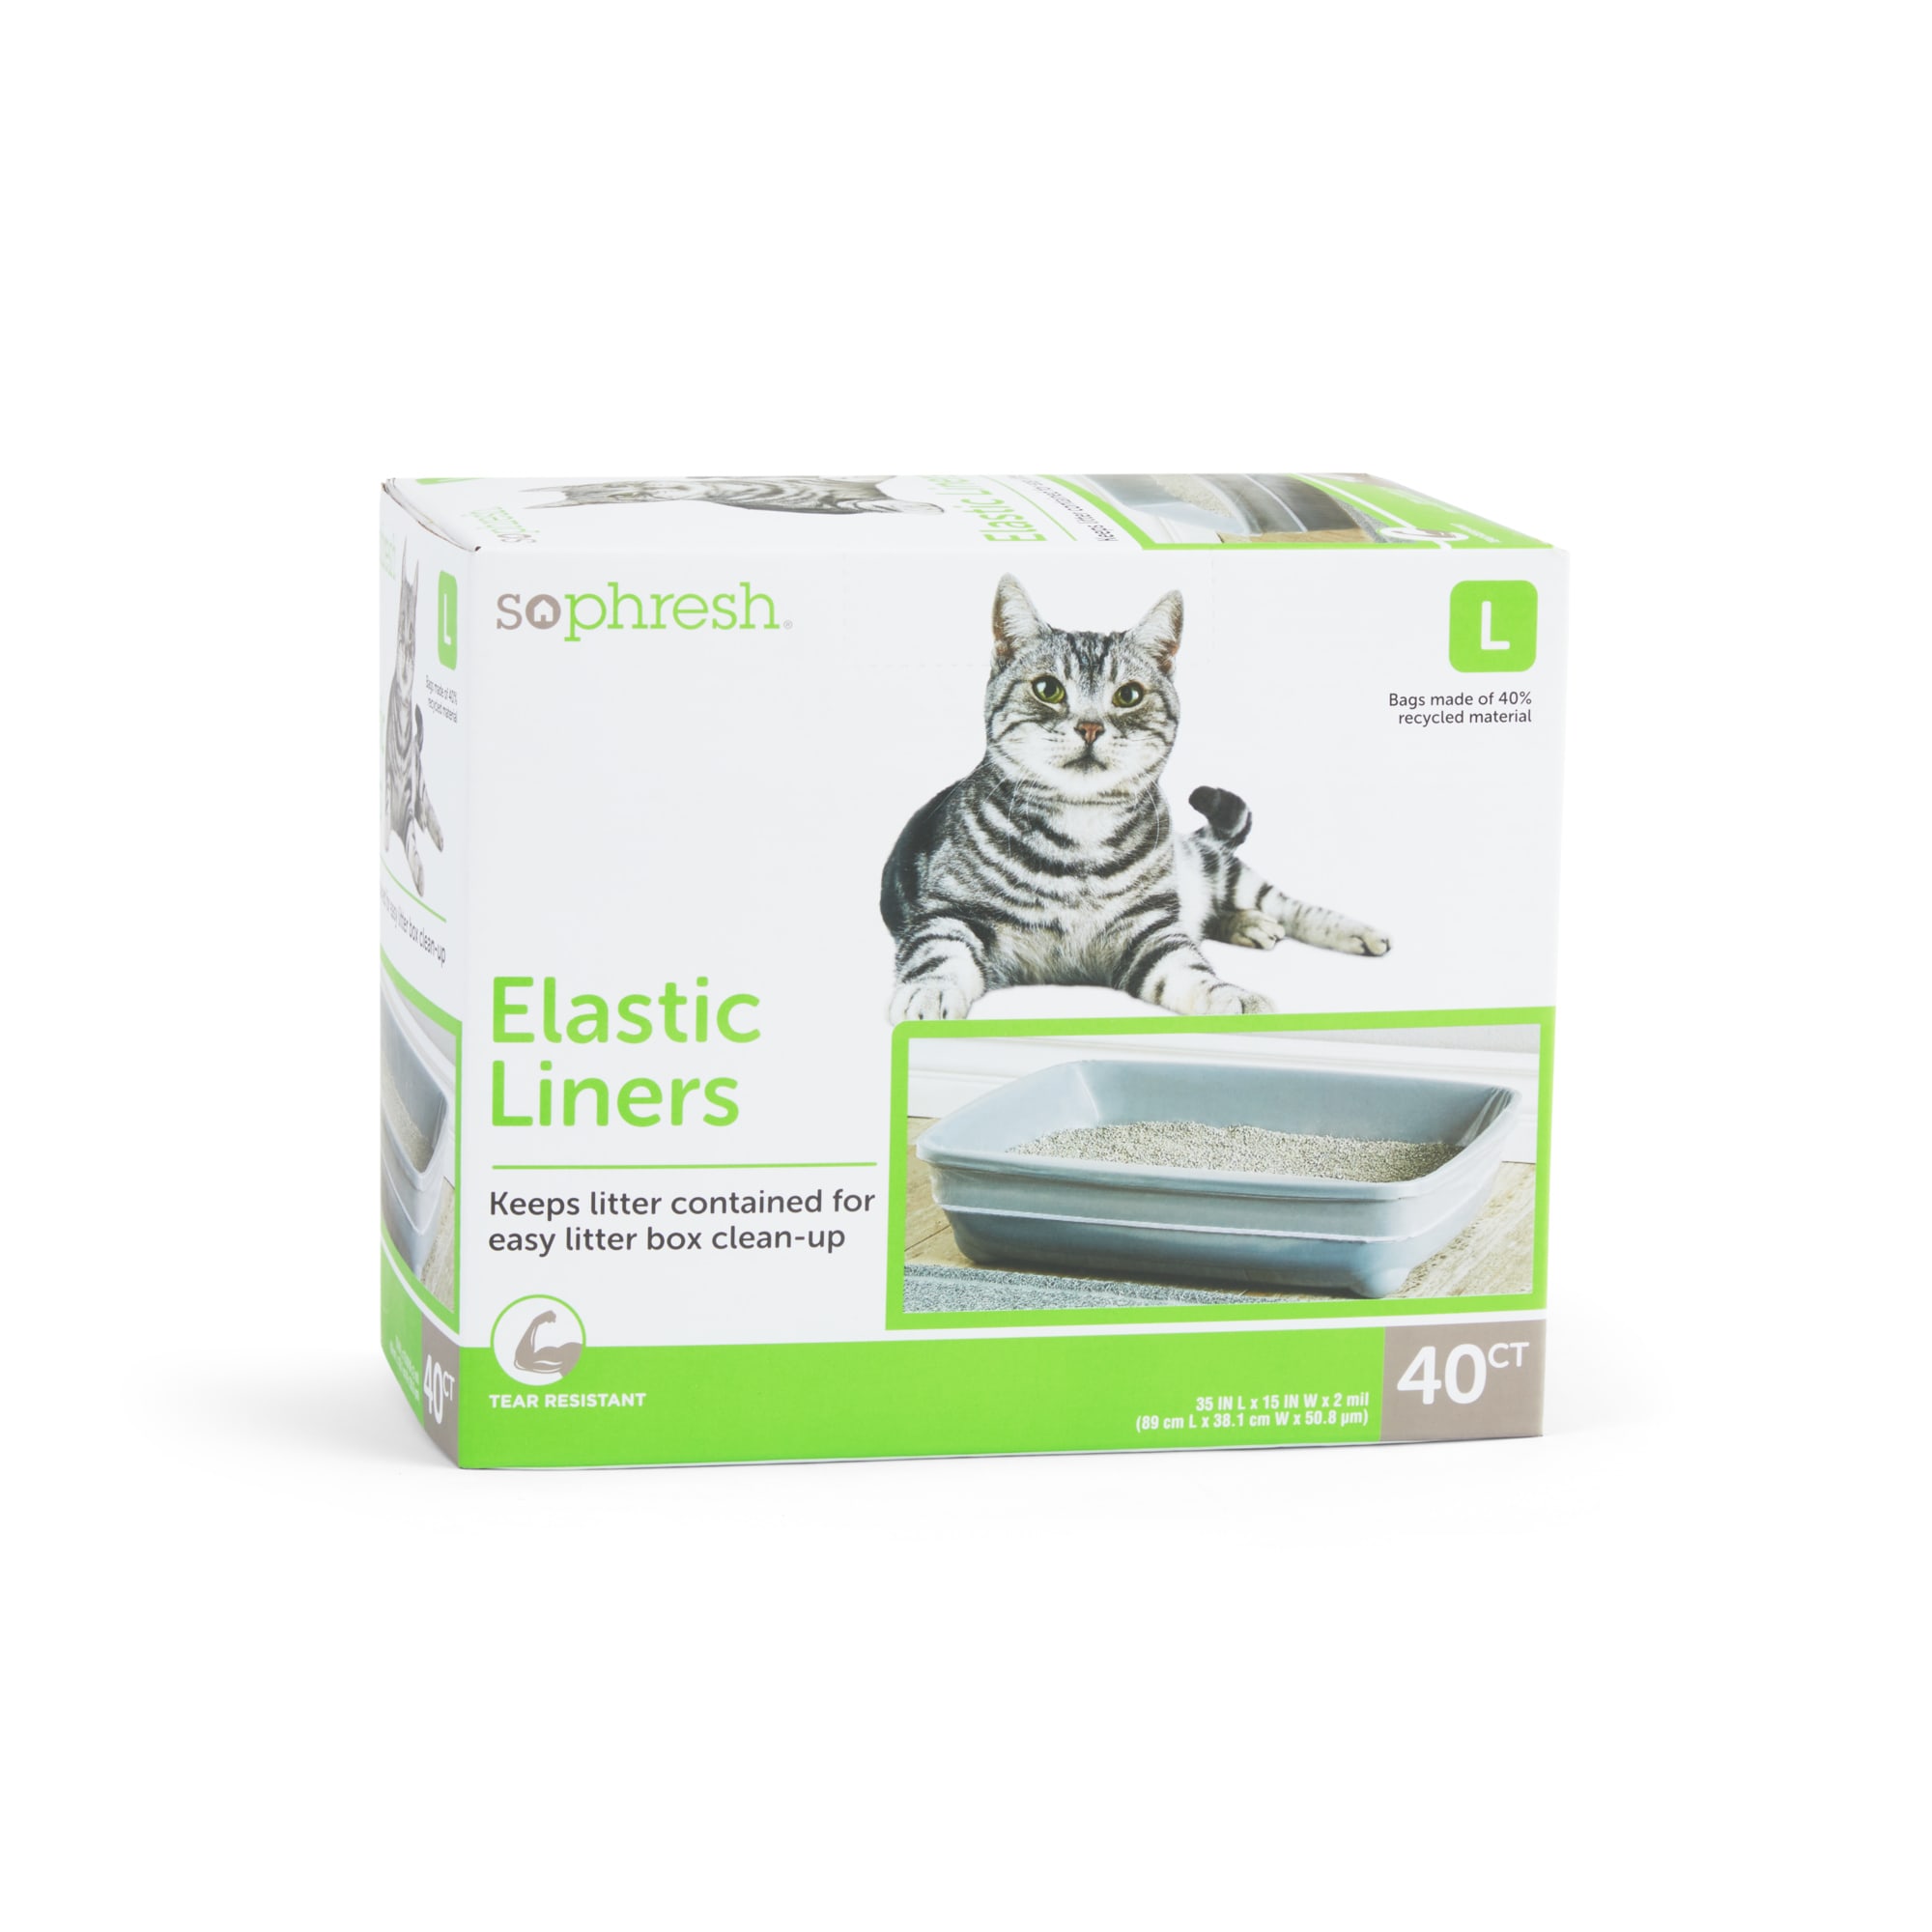 So Phresh Elastic Litter Liners for Cats, 35" L X 15" W, Count of 40